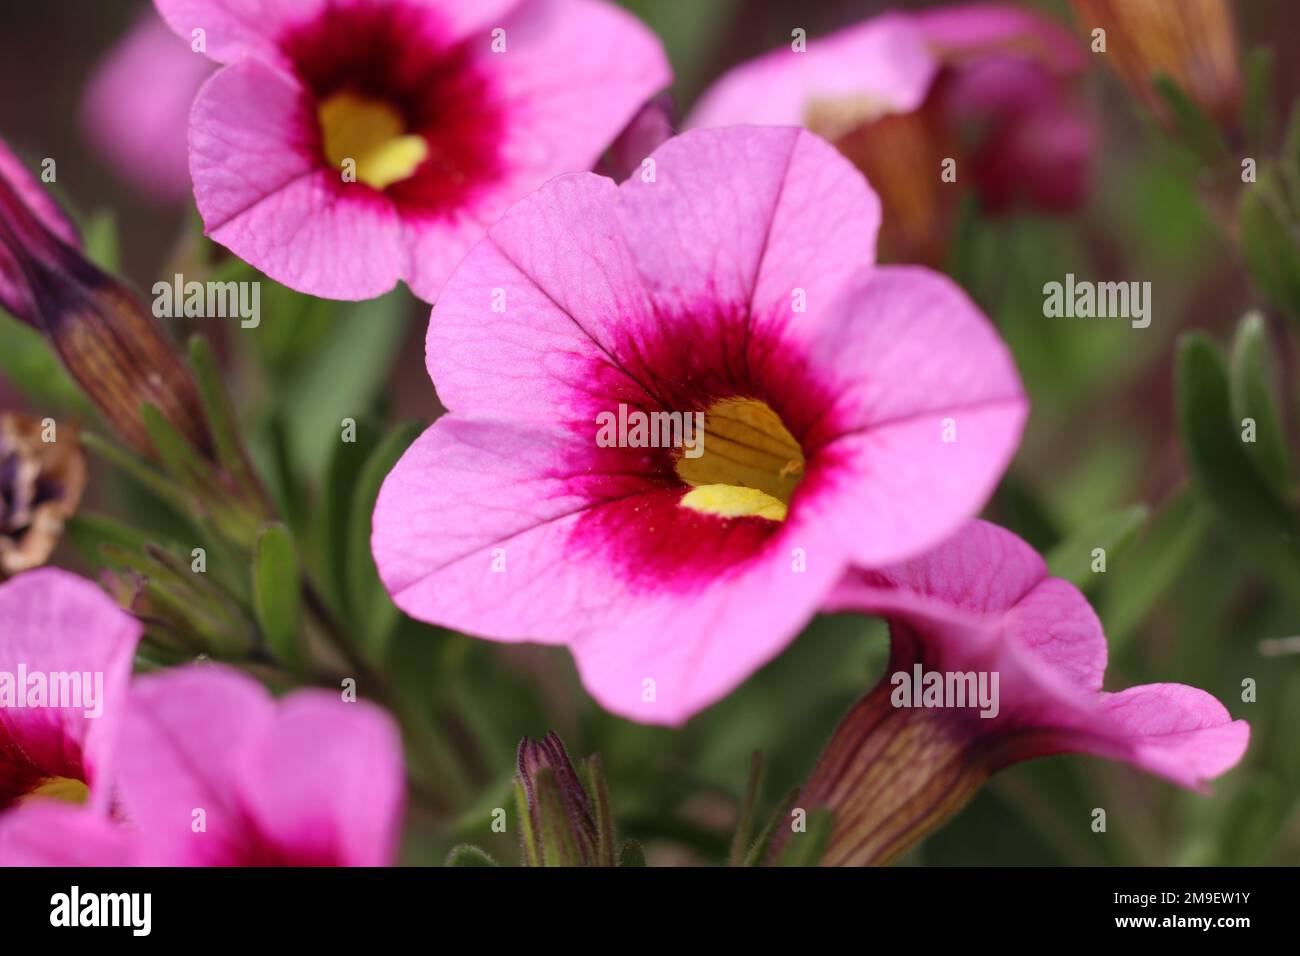 The bright pink flowers of the summer bedding plant Calibrachoa 'Light Pink Eye', in extreme close-up. Stock Photo